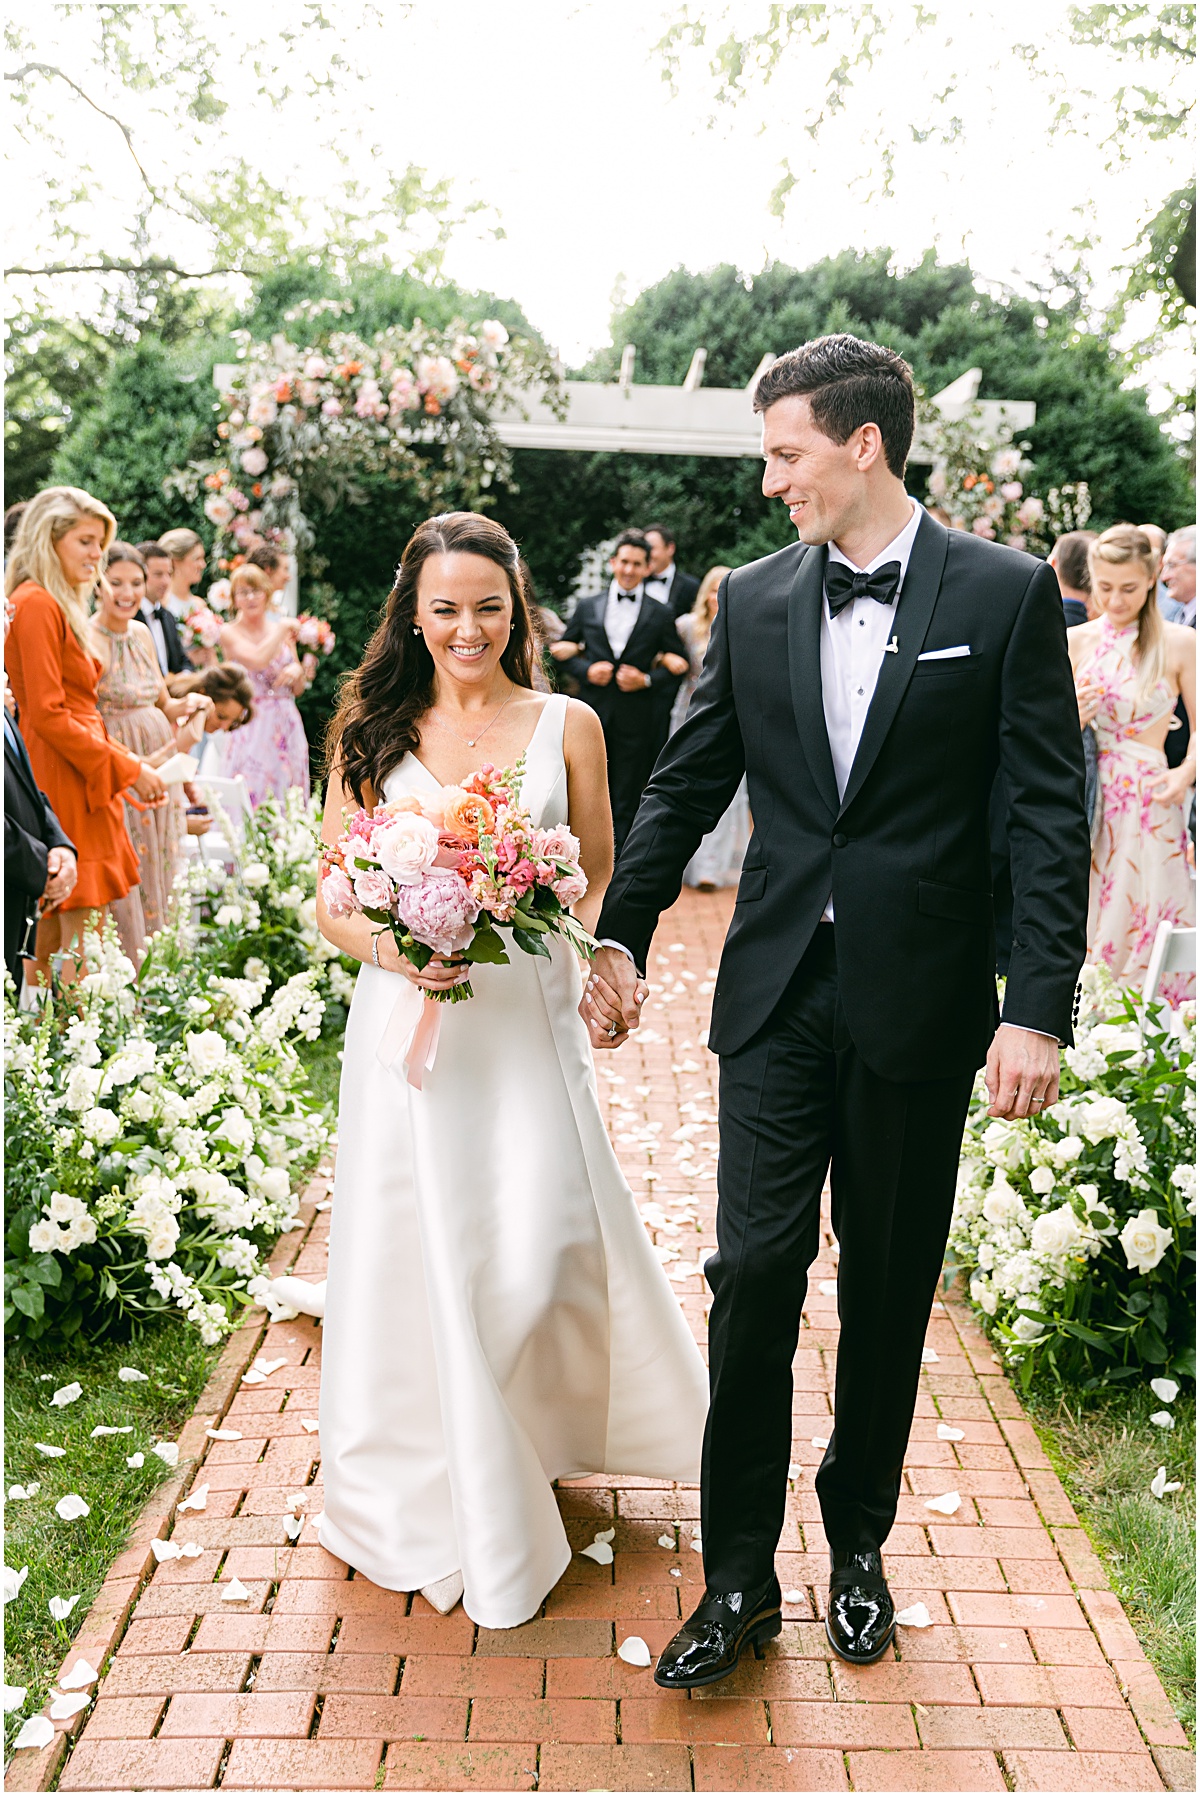 Walking down the aisle. Joyful summer wedding at the Inn at Willow Grove by Sarah Bradshaw. Planning by Kelley Cannon Events.